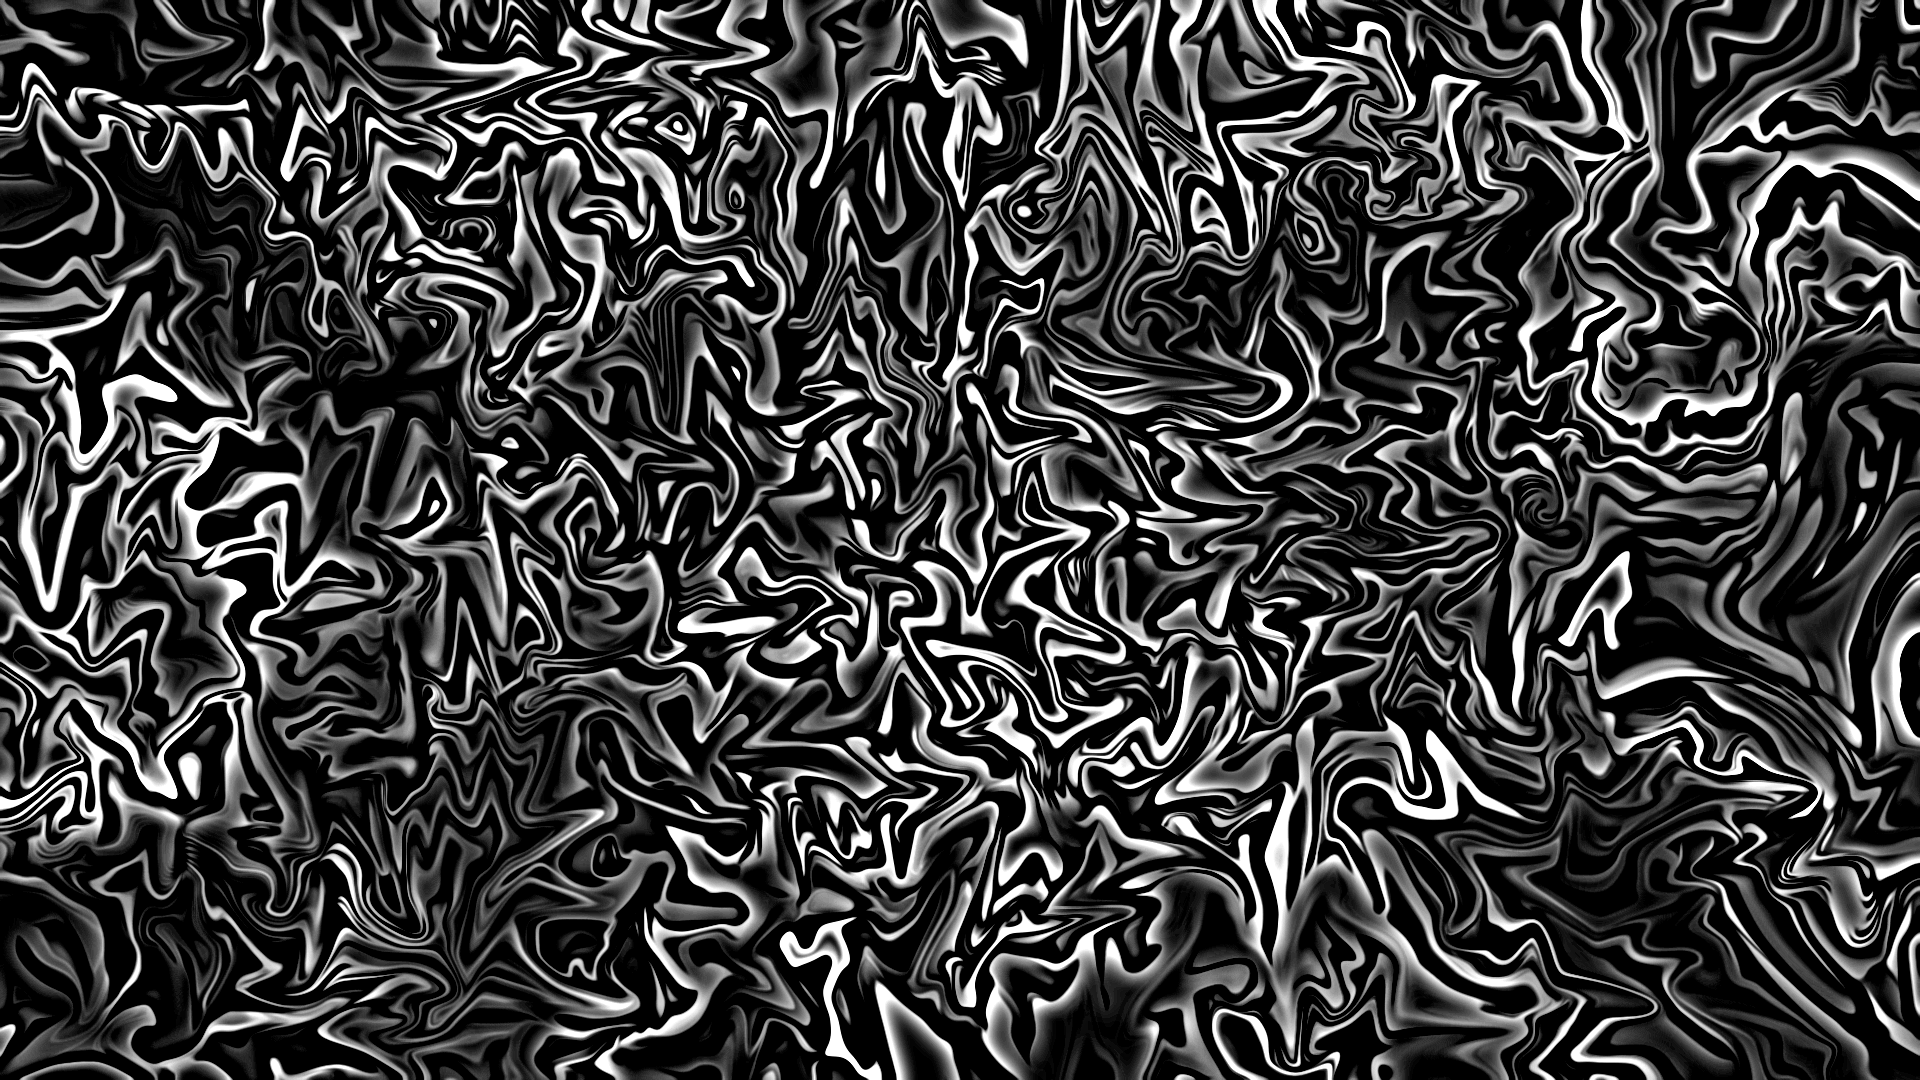 Cool Black and White Abstract Art by lonewolf6738